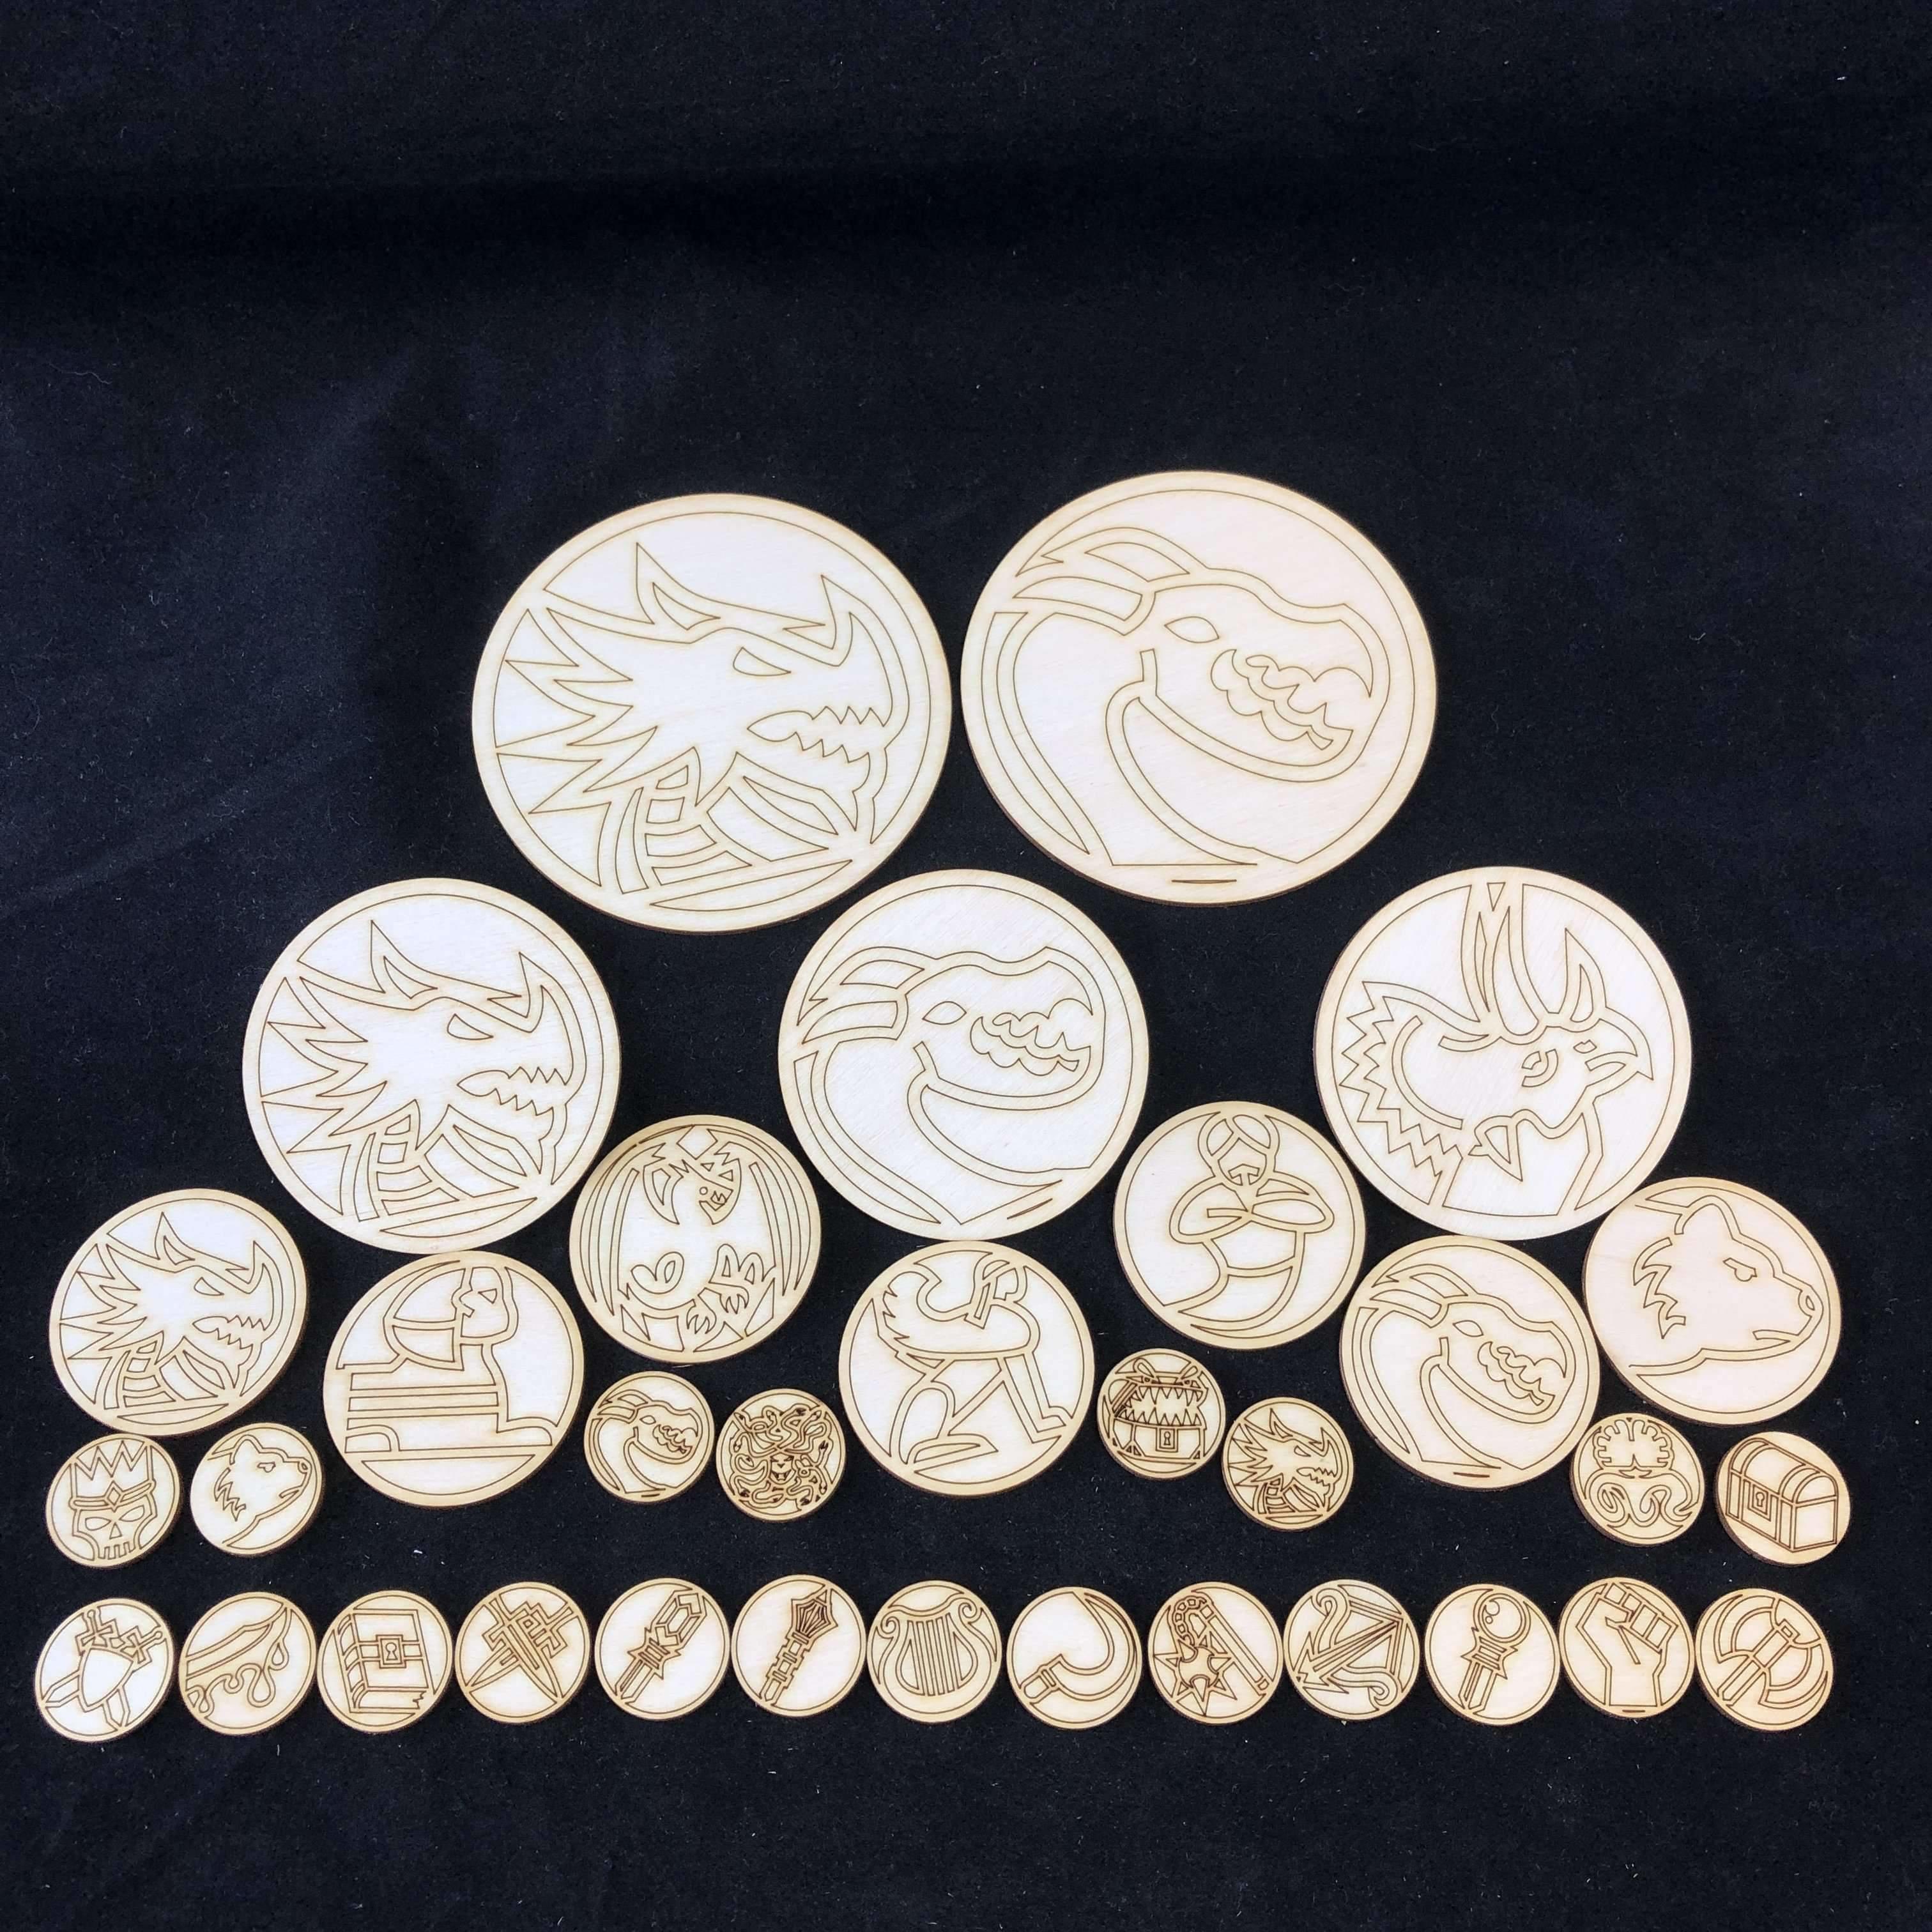 Red Berry Crafts Ltd:RBCBasics 33 Piece Advanced Edition Gaming Token Set